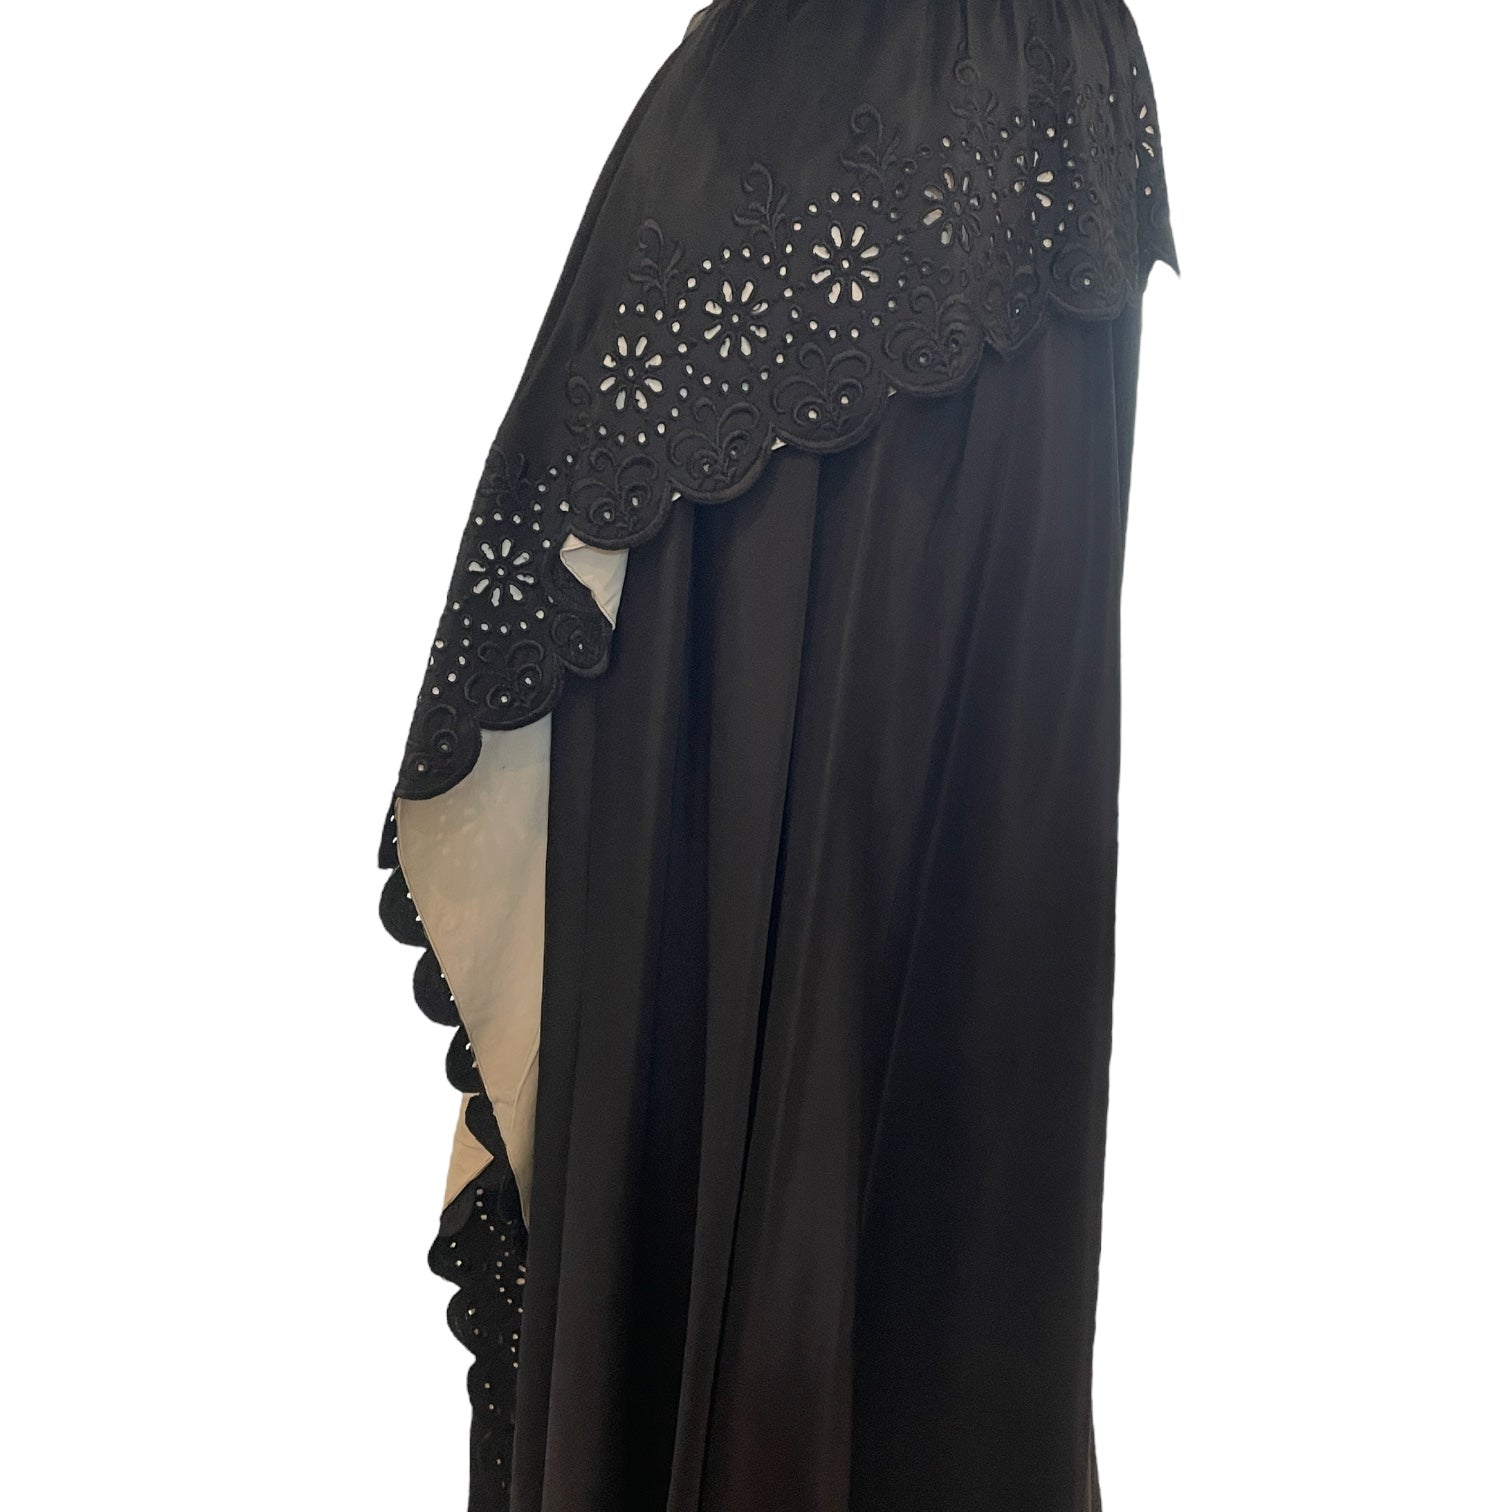 Channelling Audrey 1950s Off Shoulder Black-tie Evening Dress  Maxi Truly one-of-a-kind.